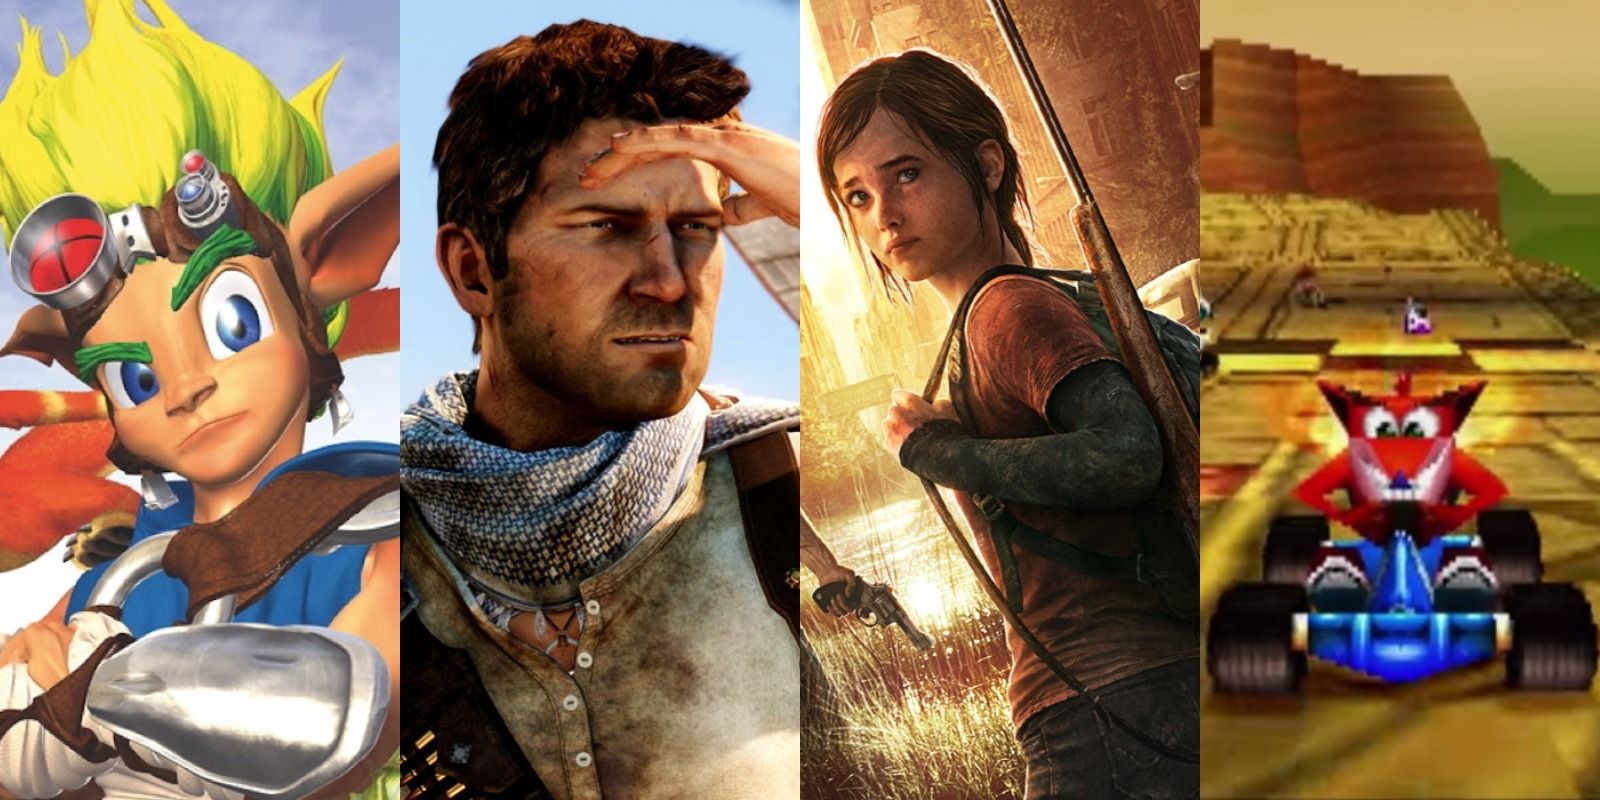 Jak, Nate in Uncharted 3, Ellie in TLOU, and Crash in Crash Team Racing